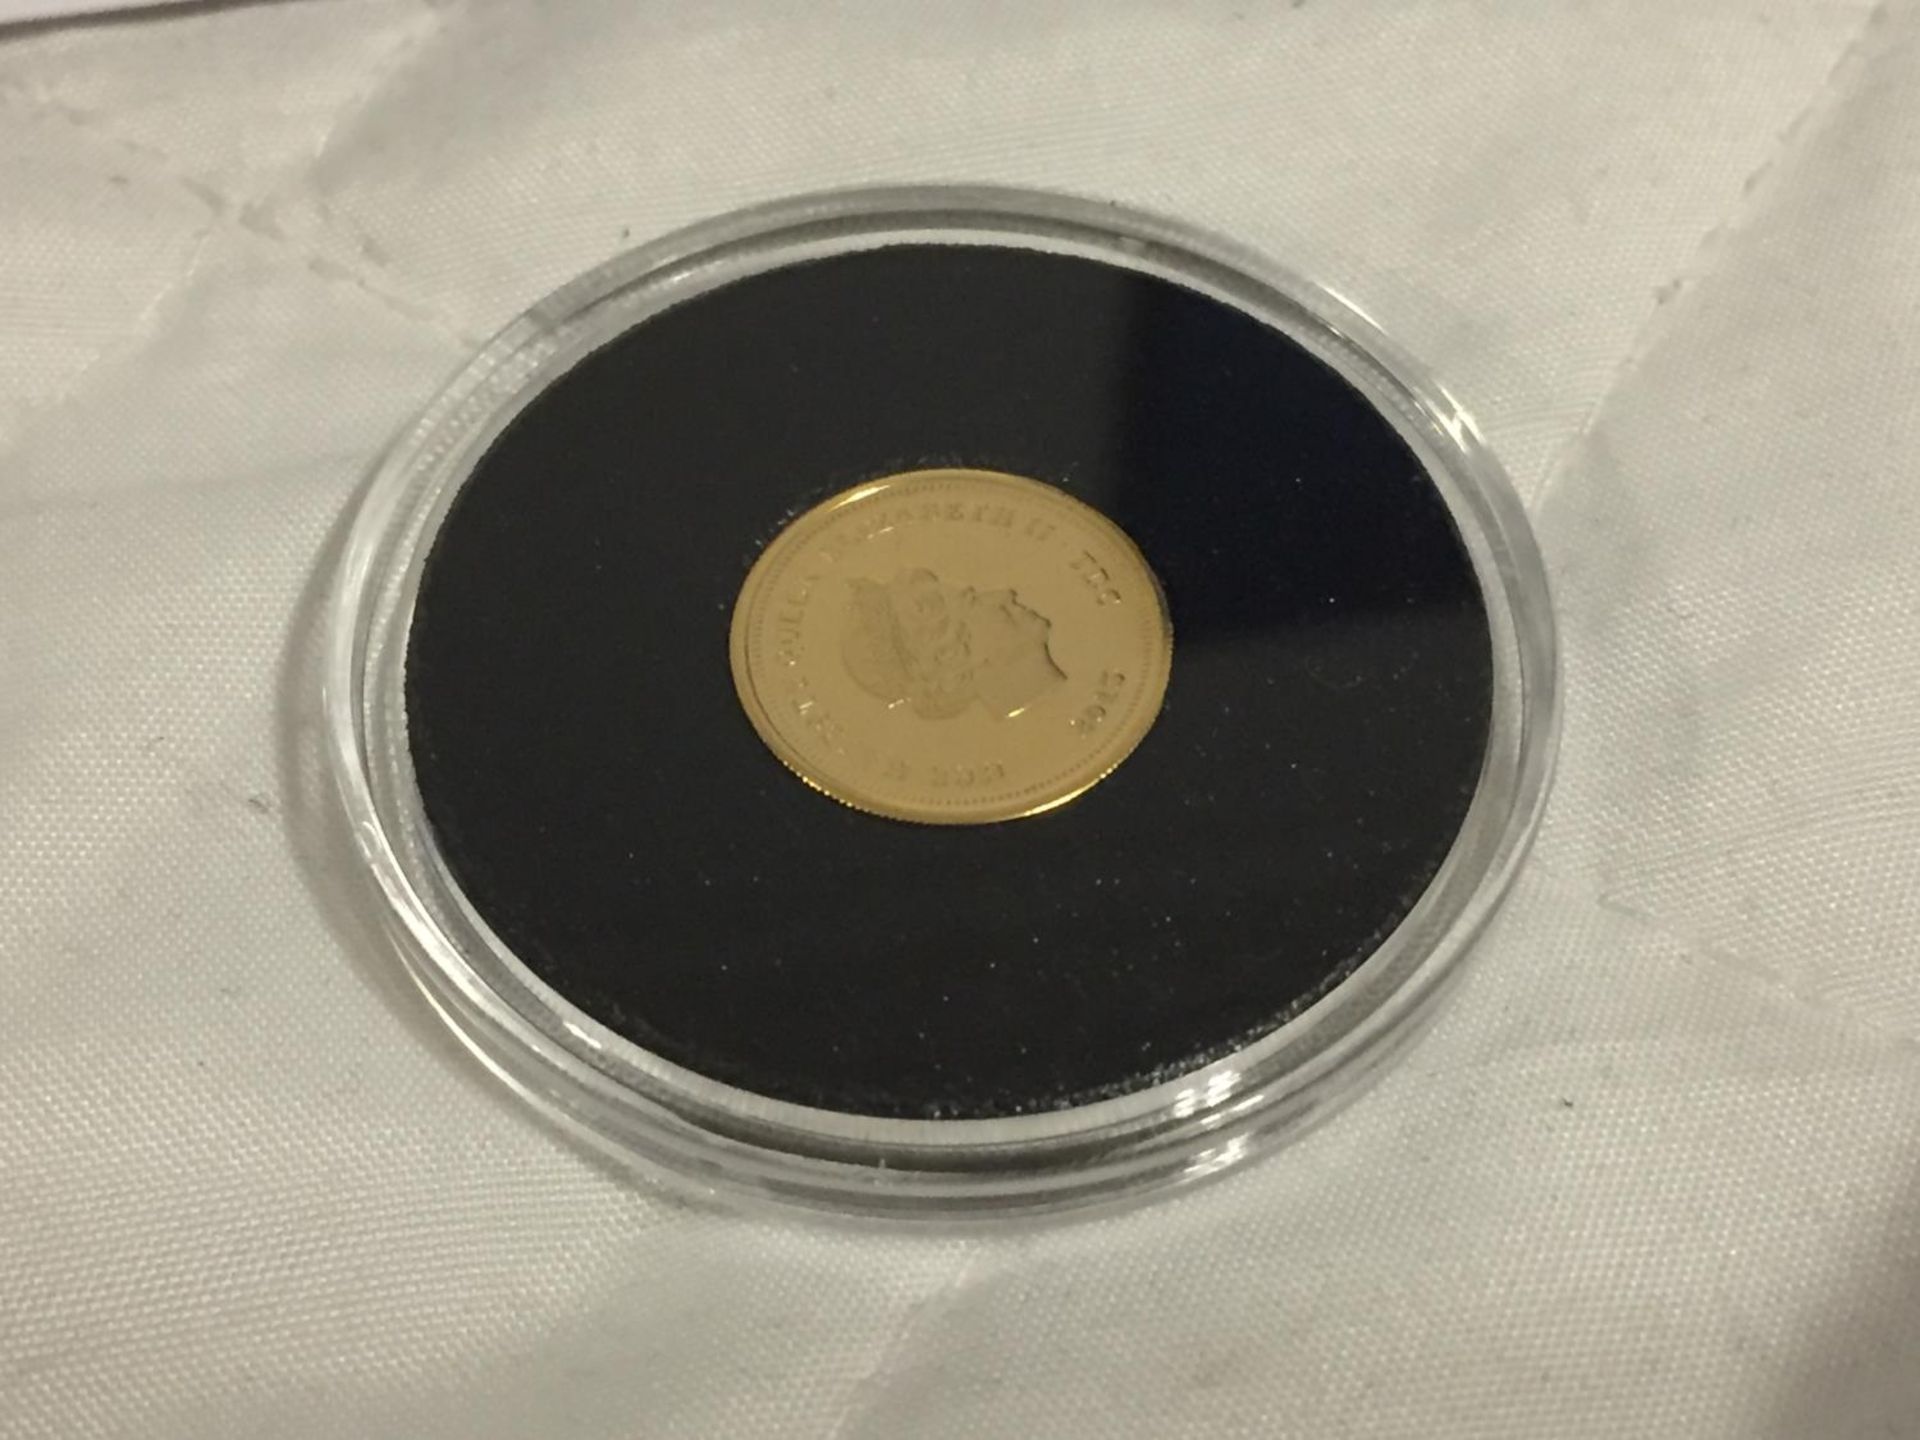 A CASED 200TH ANNIVERSARY OF THE BATTLE OF WATERLOO COIN COLLECTION SET STRUCK IN SOLID 9 CARAT GOLD - Image 3 of 6